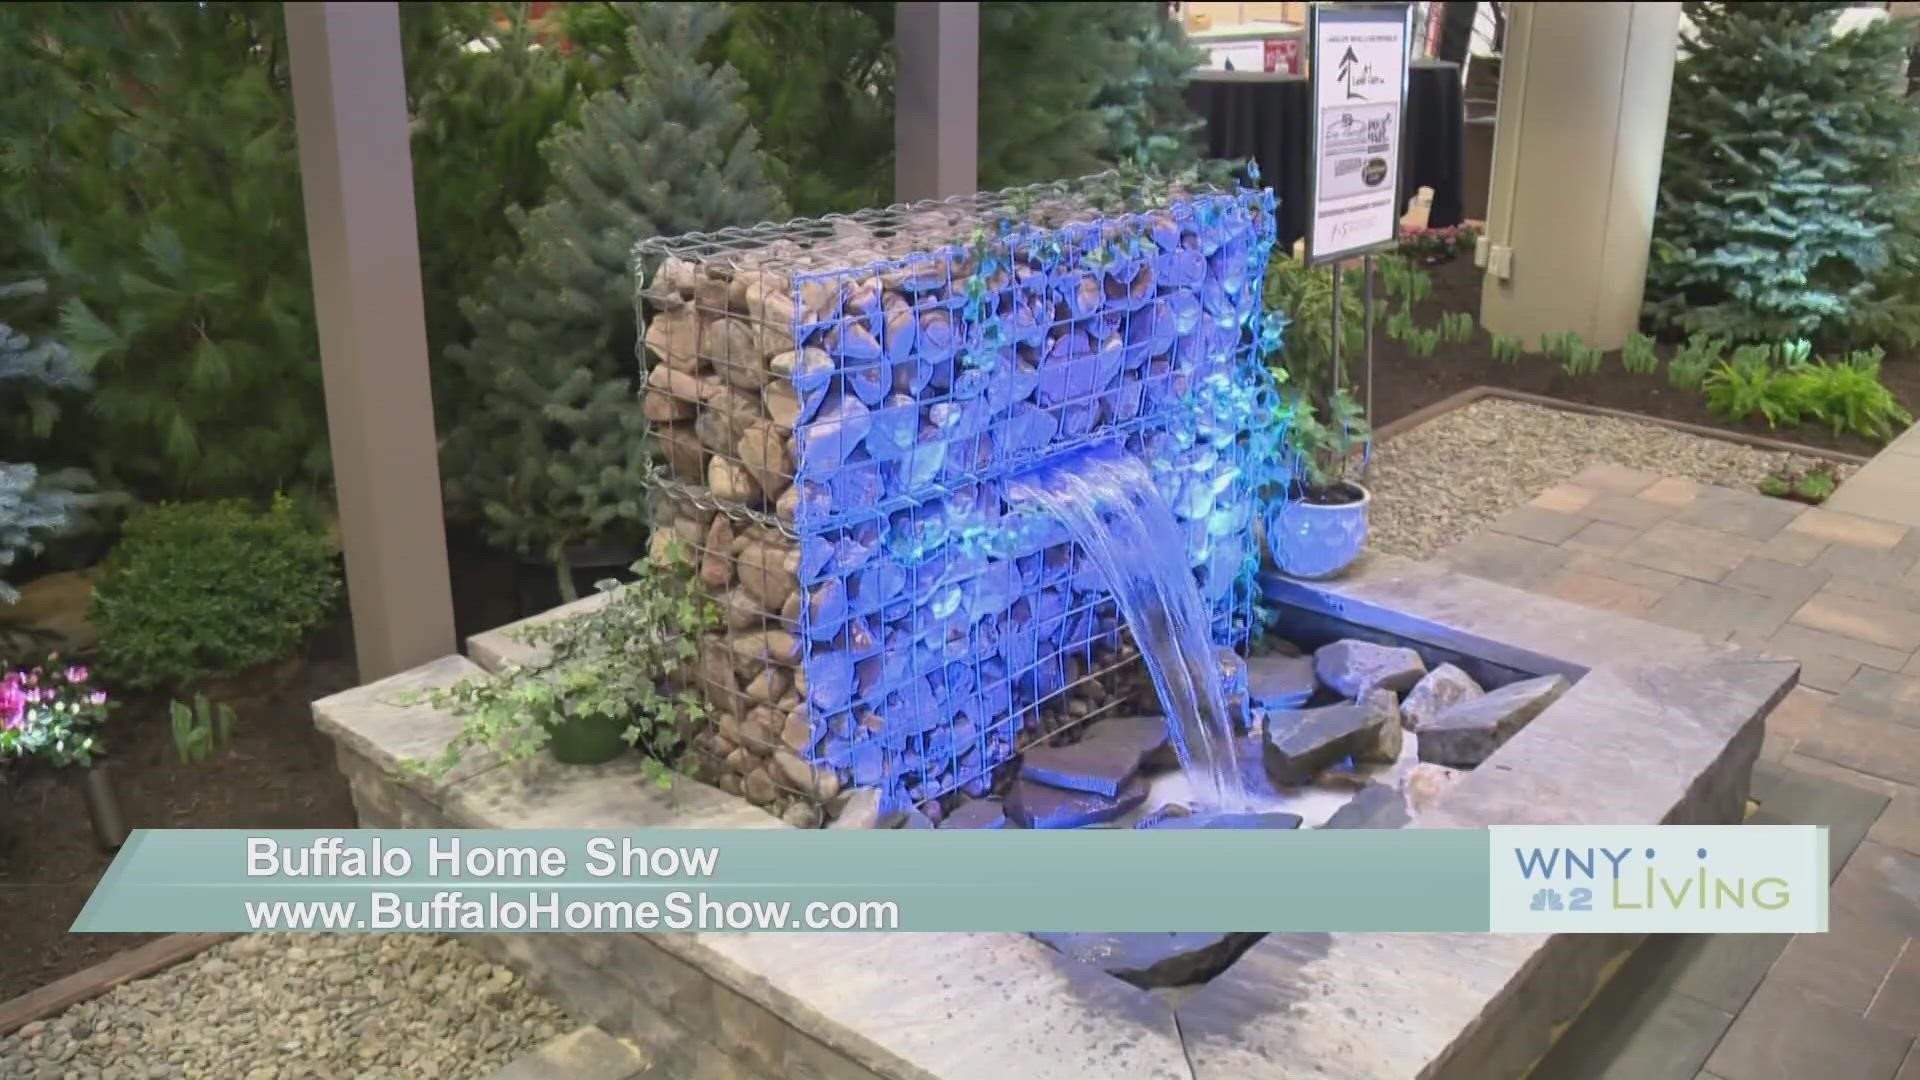 WNY Living - March 4th - Buffalo Home Show -THIS VIDEO IS SPONSORED BY  BUFFALO HOME SHOW